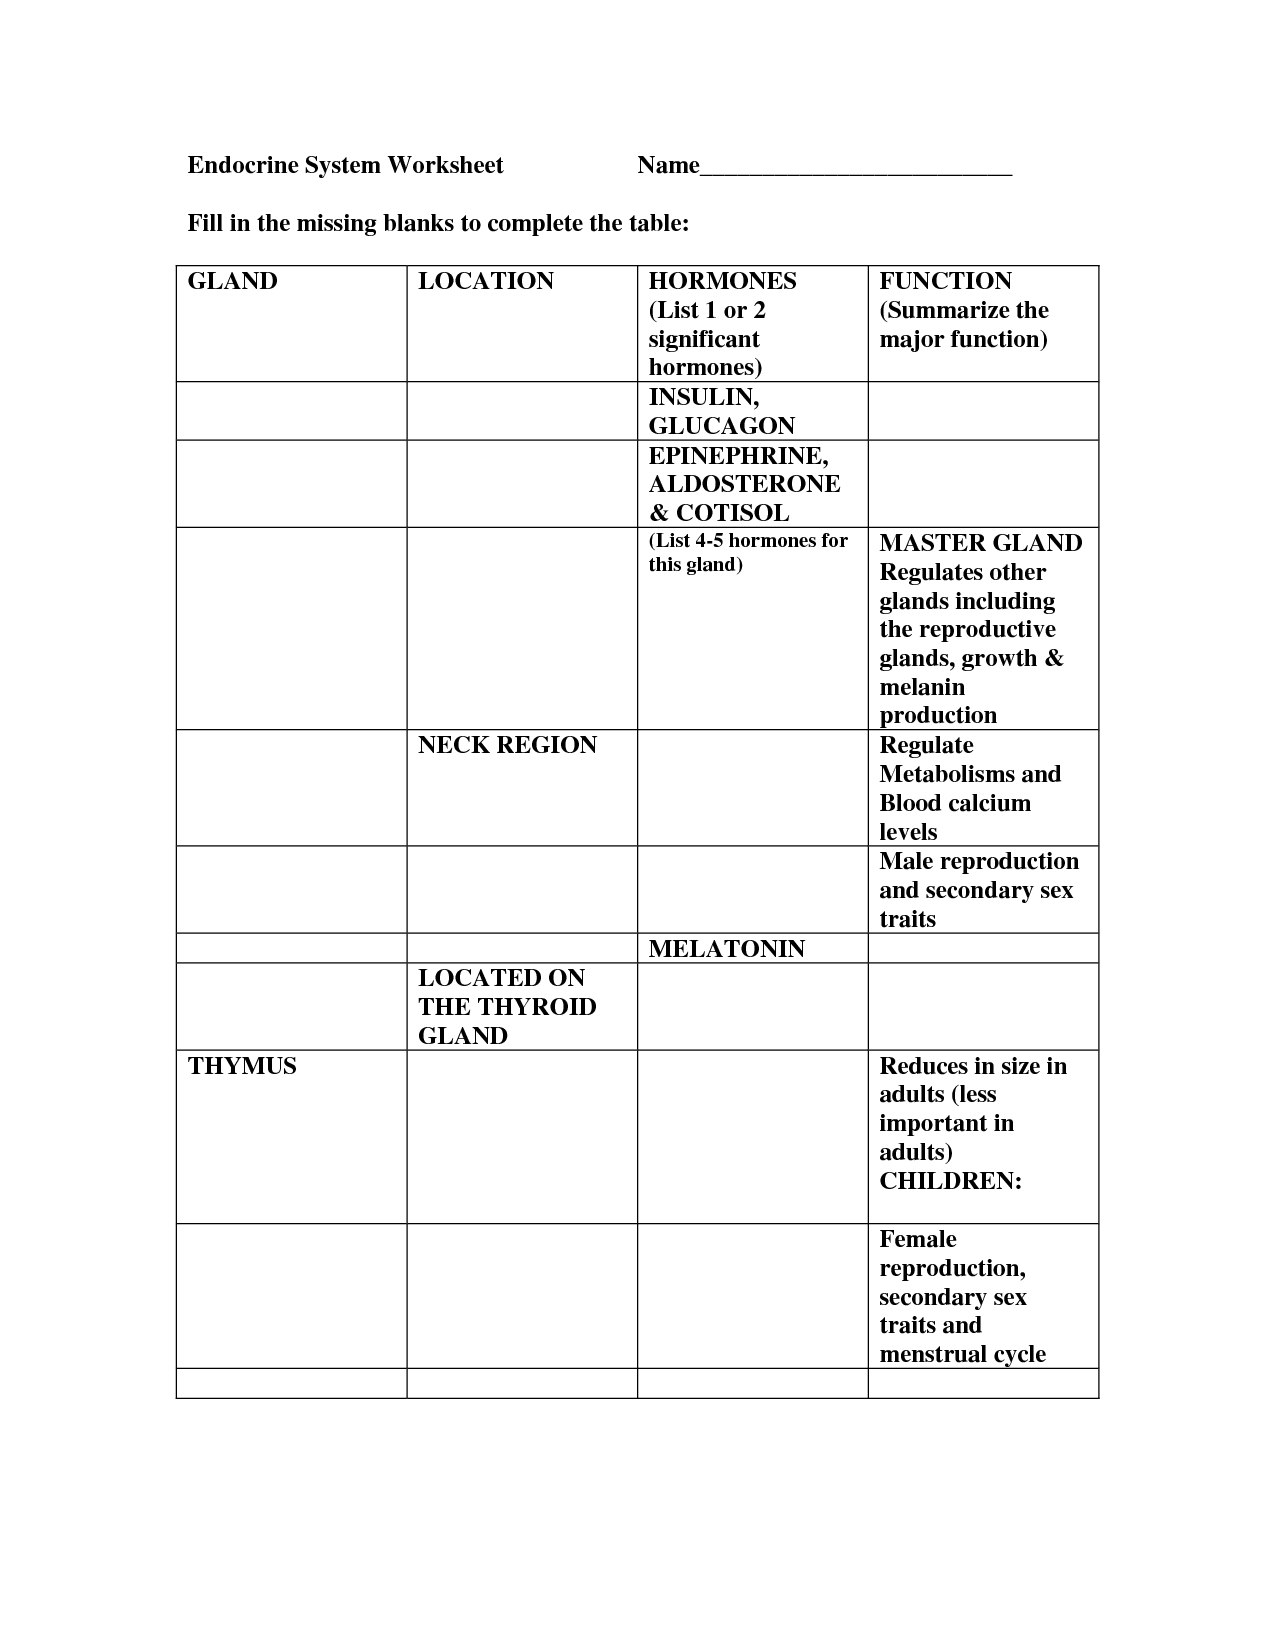 15-best-images-of-blank-function-tables-worksheets-function-tables-worksheets-input-output